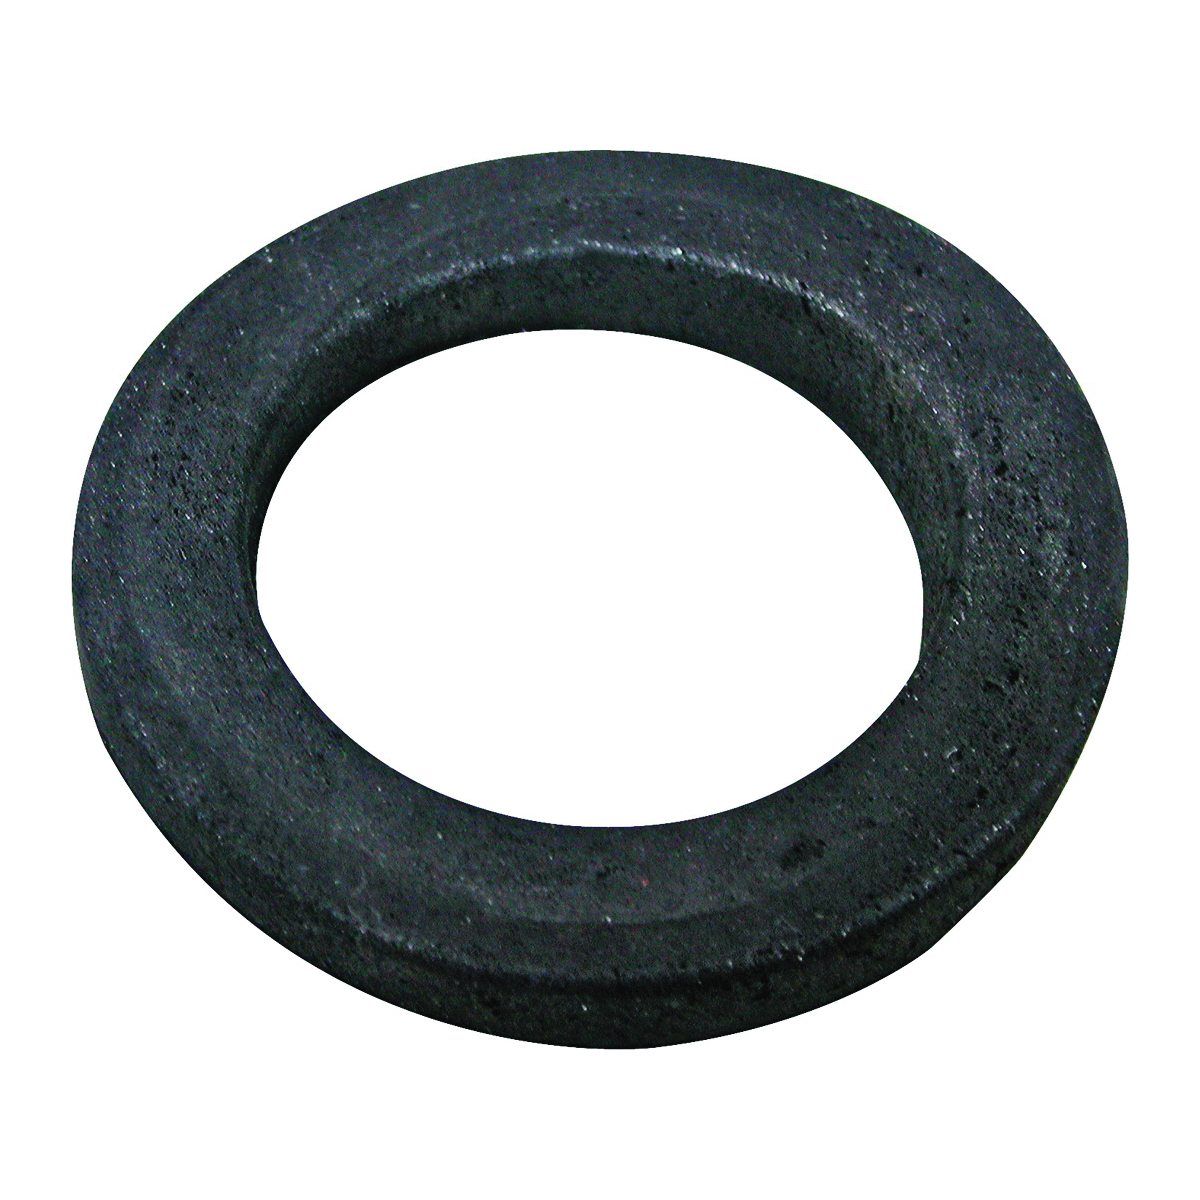 PMB-124 Overflow Washer, 3-1/4 in OD, 2-1/4 in ID and 15 mm H, 6 mm H, 3-1/4 in Dia, 13 mm Thick